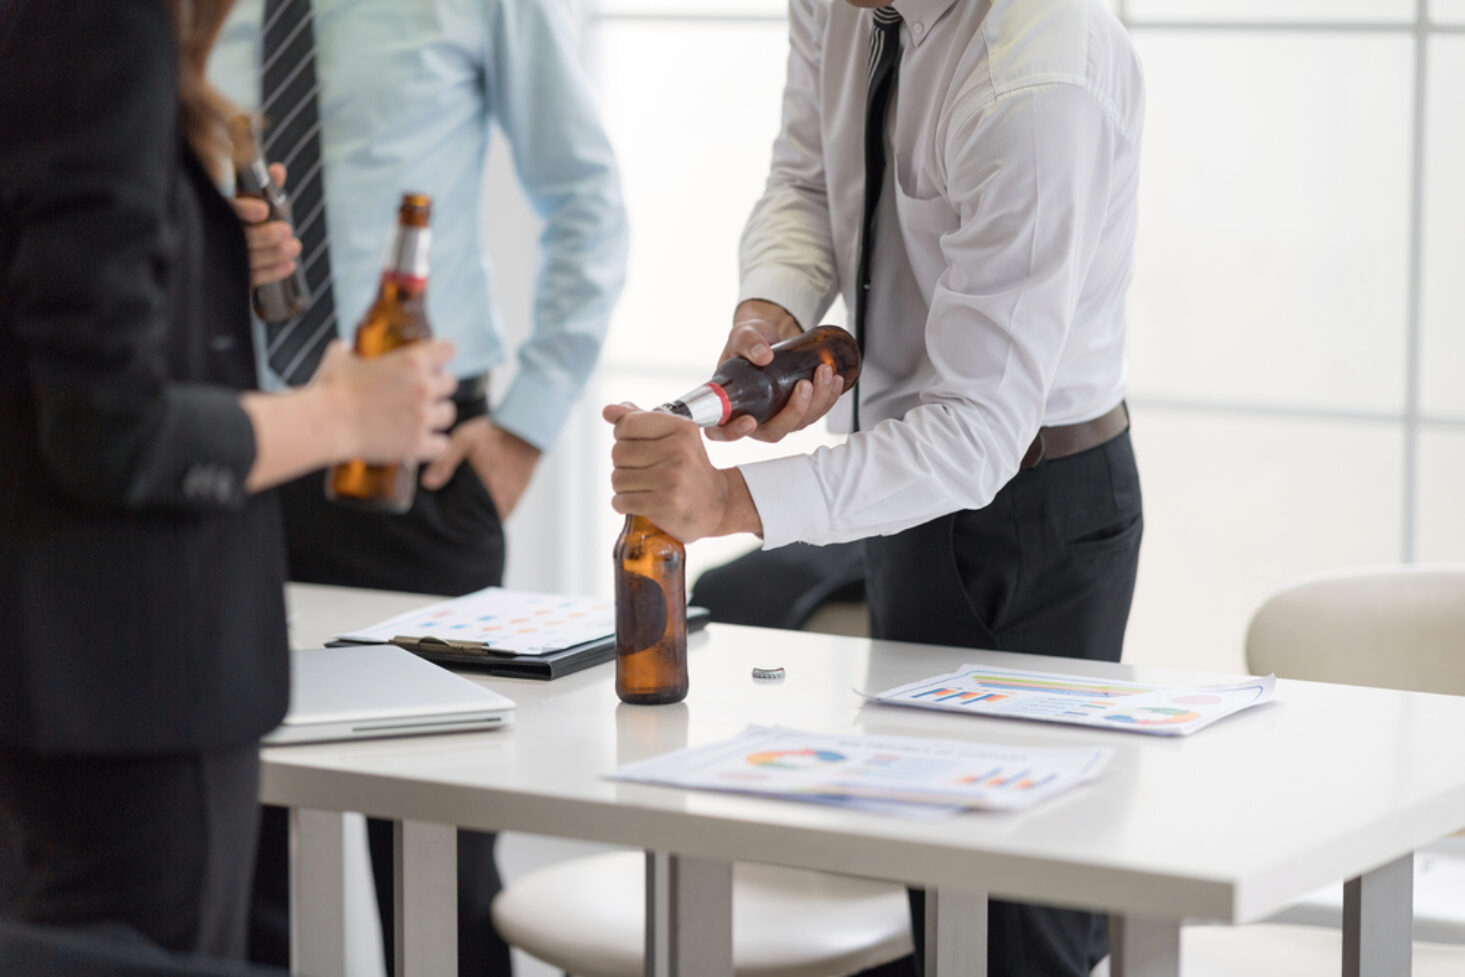 How to Handle Alcohol at Office Parties